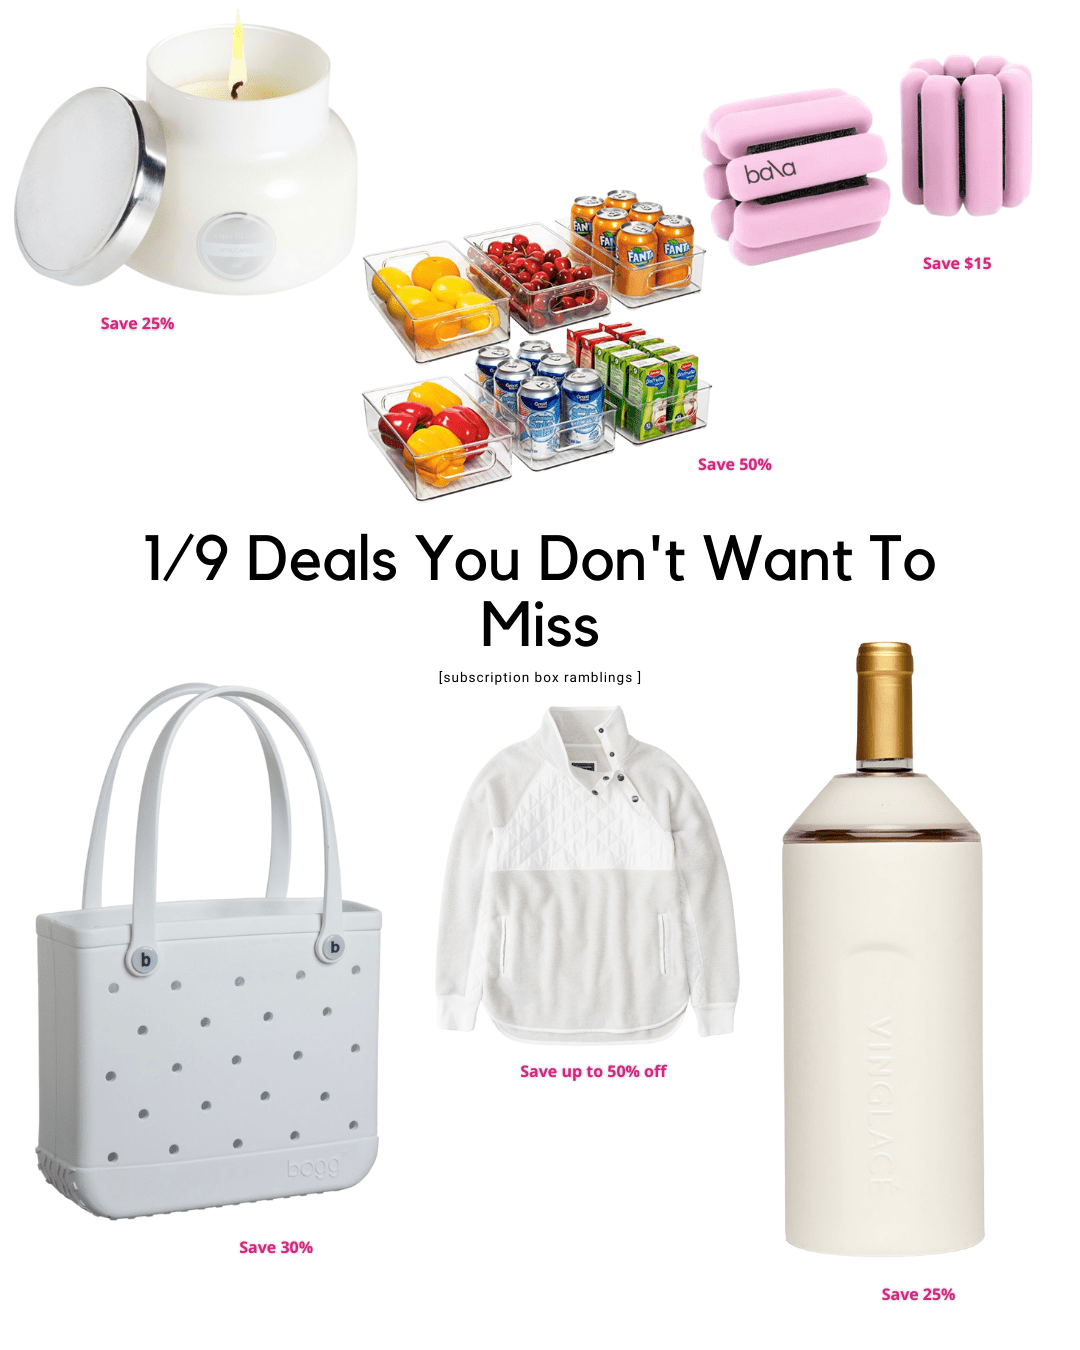 Deals You Don’t Want to Miss – 1/9